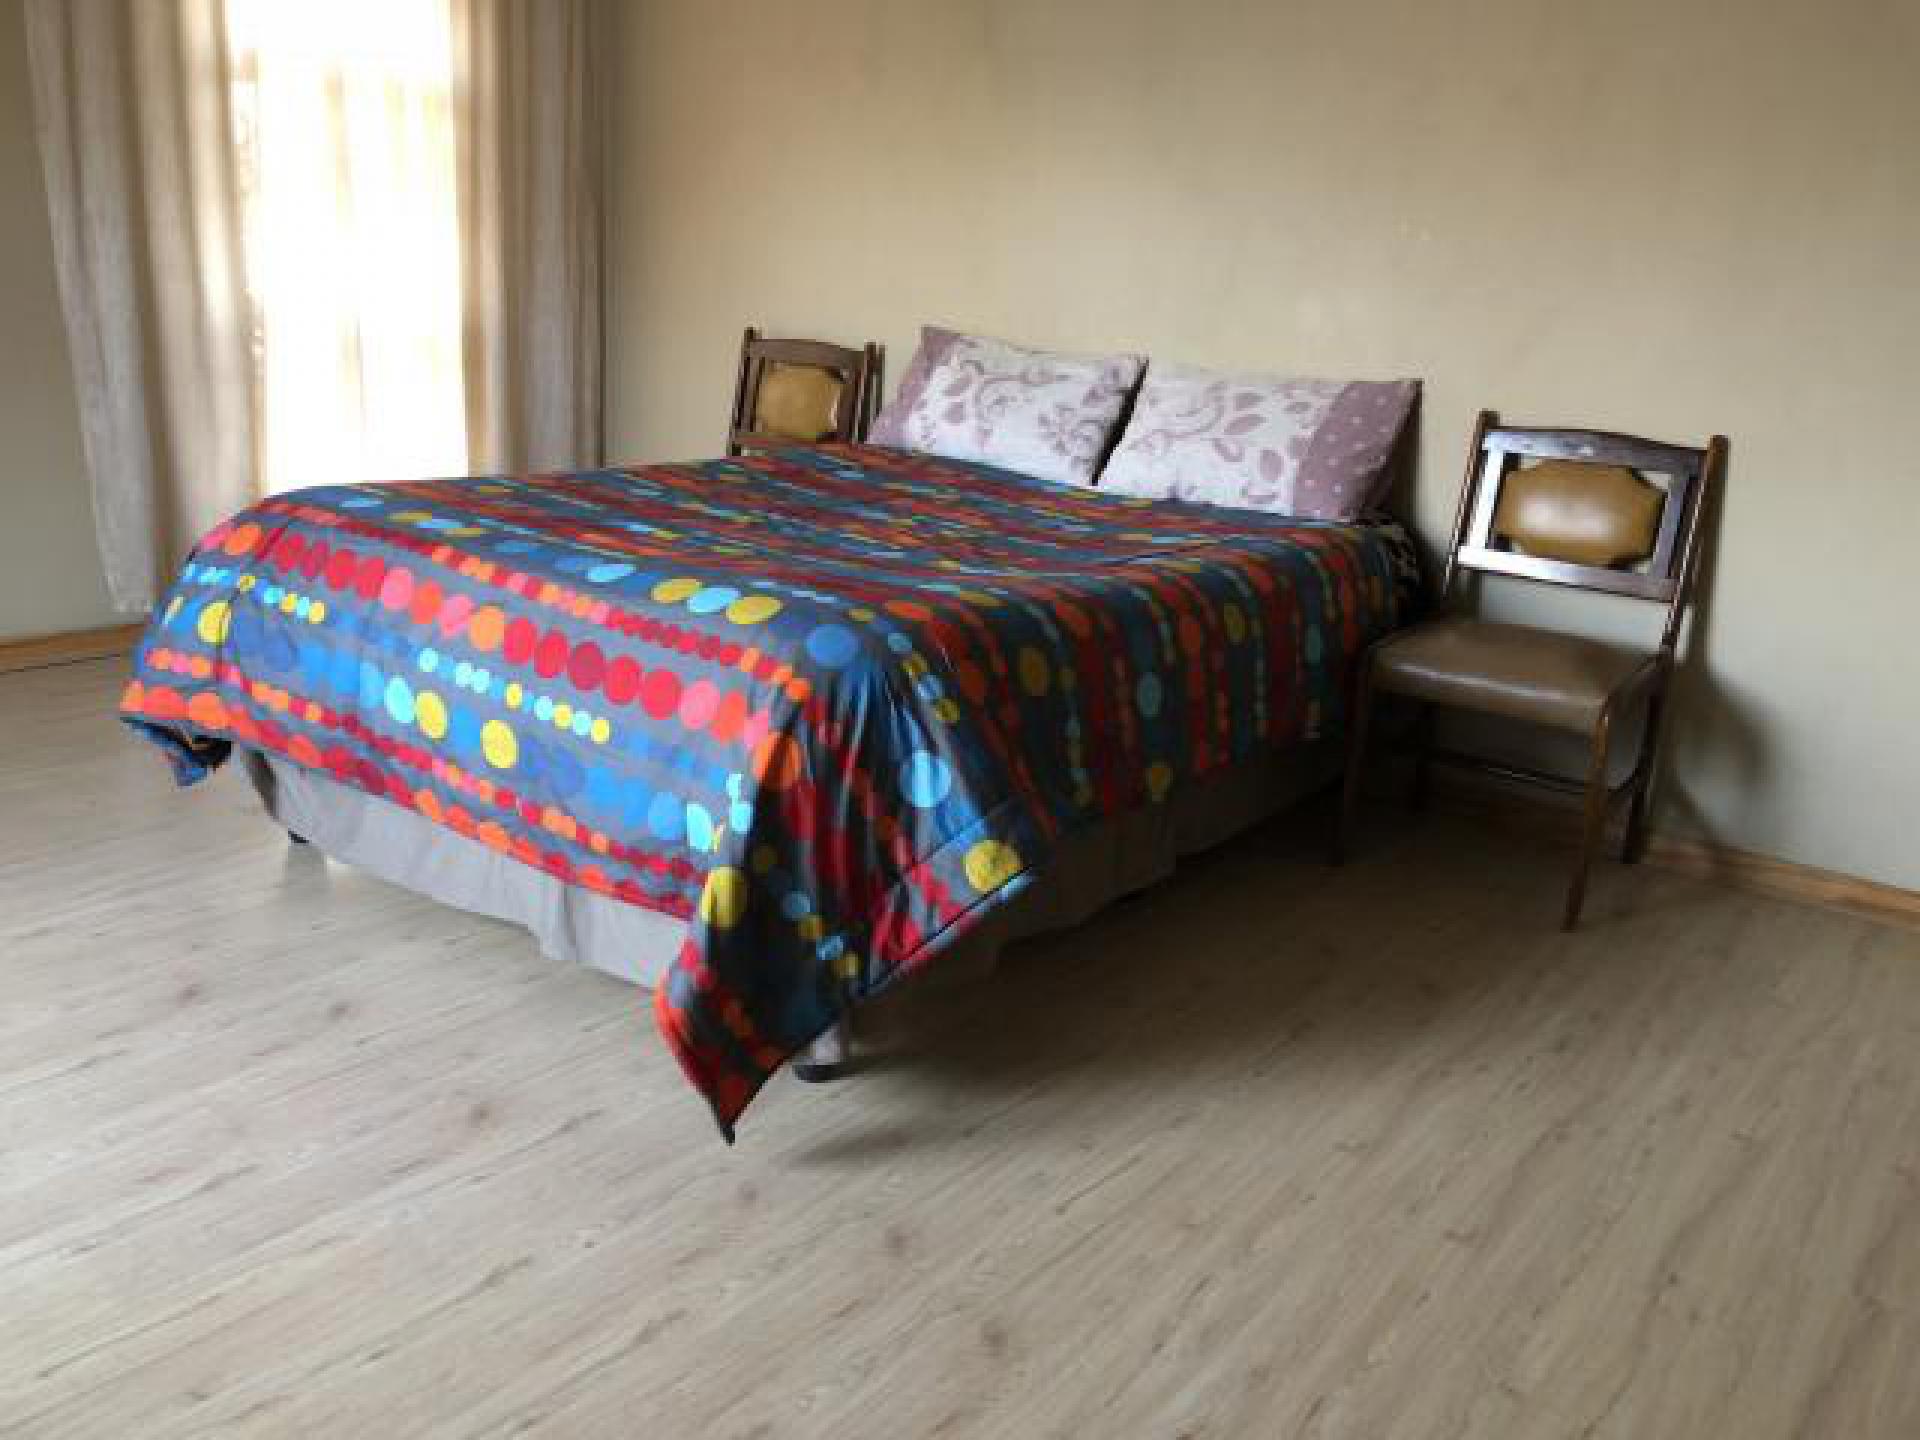 Main Bedroom of property in Lourierpark